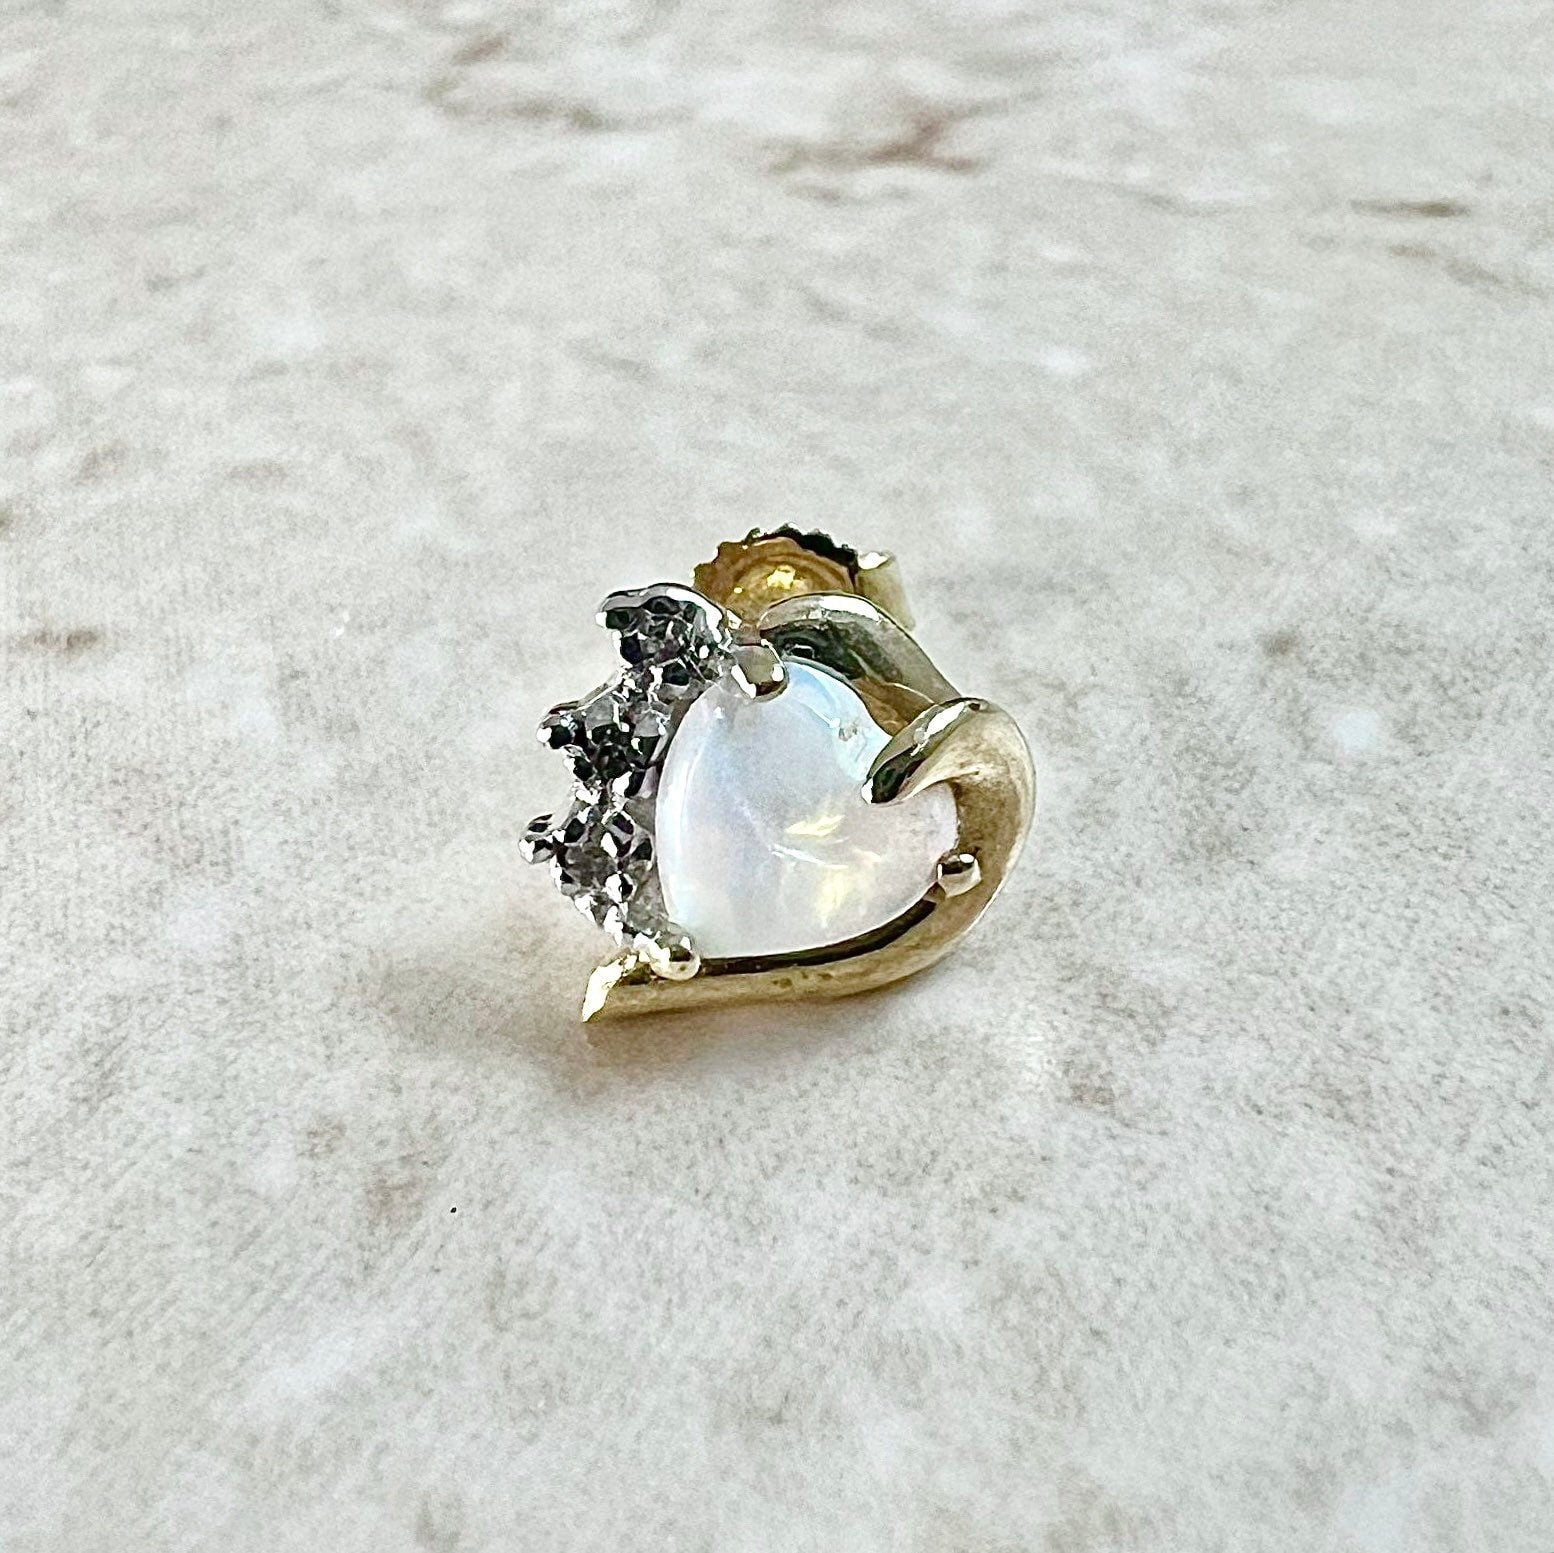 Single 14K Natural Opal Stud Earring - Yellow Gold Opal Stud - Genuine Opal Earrings - Diamond & Opal Heart Earrings - Best Gifts For Her